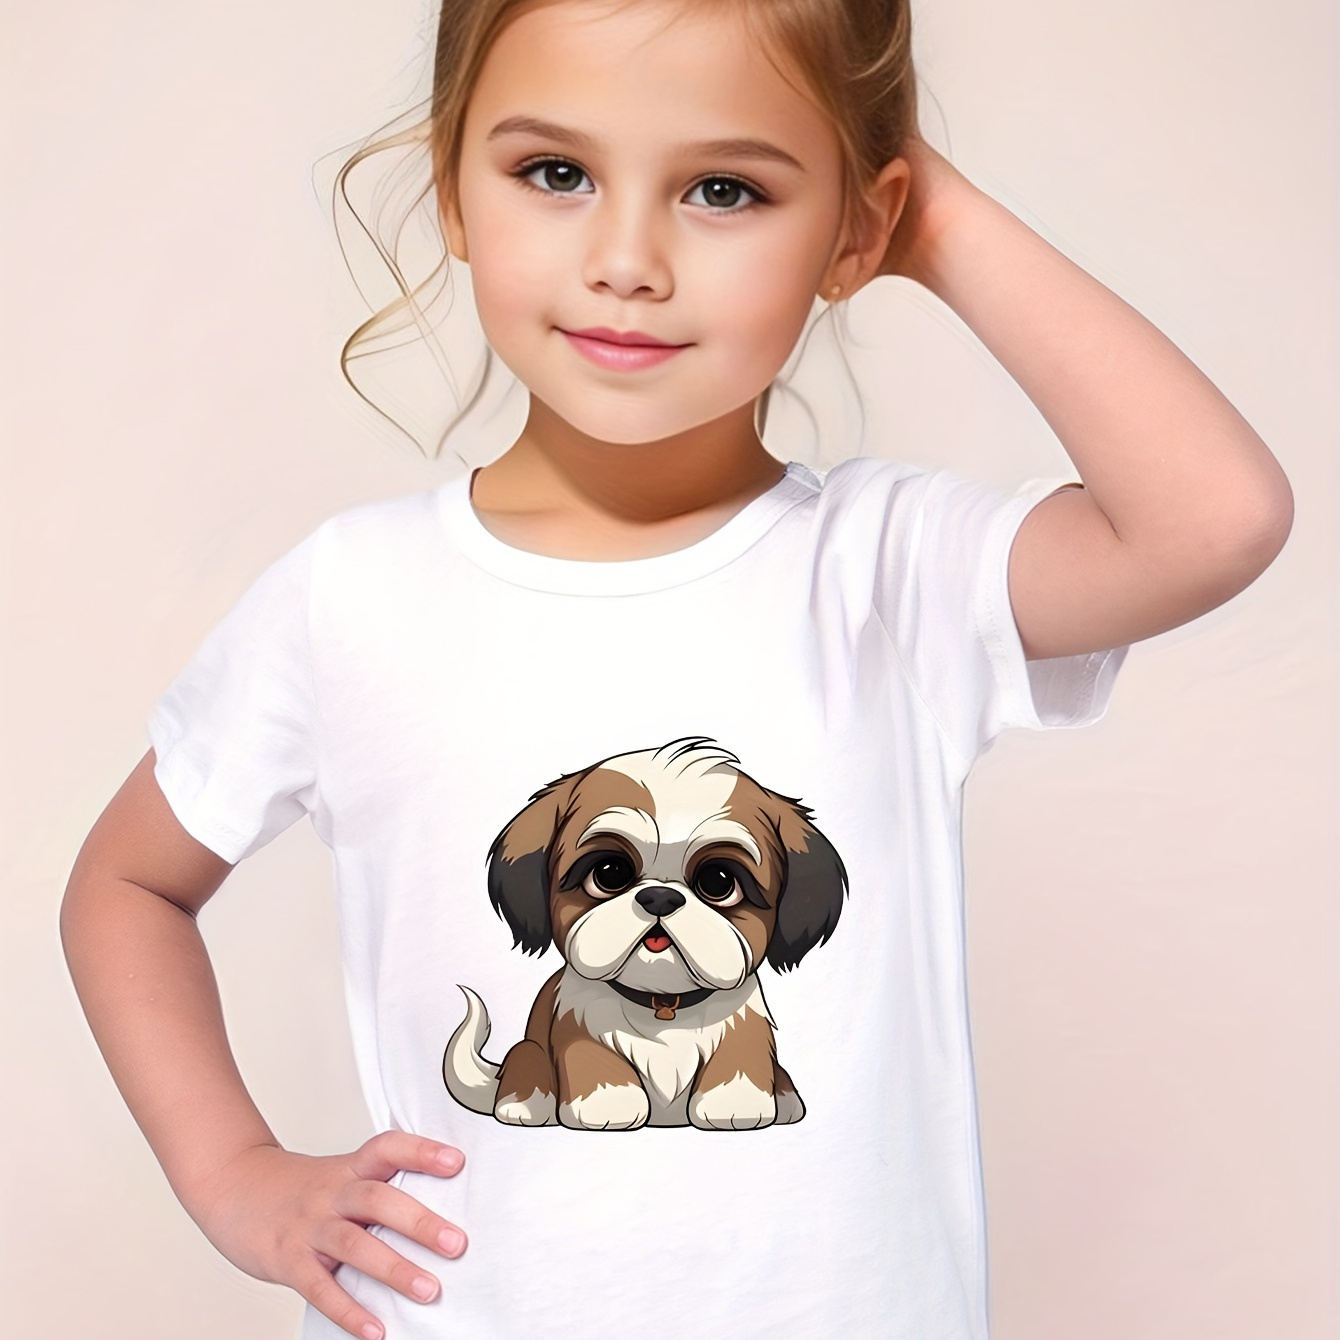 

100% Cotton, Furry Puppy Print Short Sleeve T-shirt, Casual & Versatile Tees Tops For Girls Summer Christmas Gift